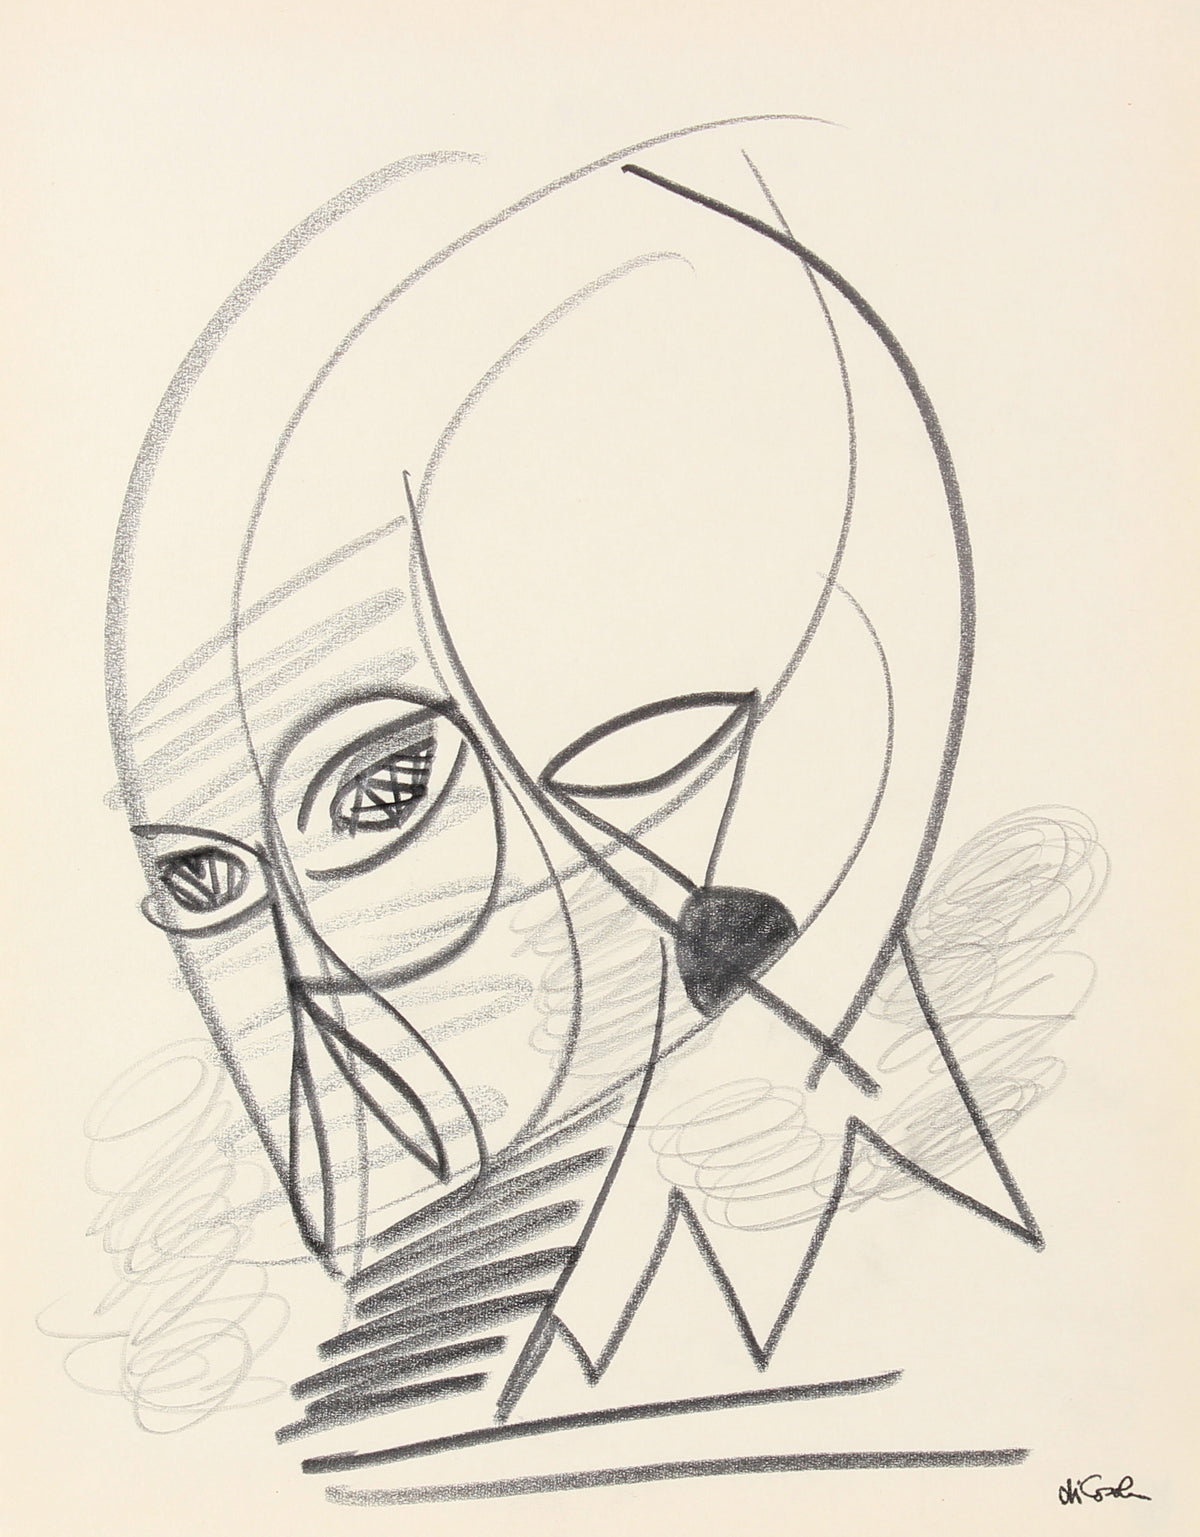 Abstract Figurative Study &lt;br&gt;Late 20th Century Graphite &lt;br&gt;&lt;br&gt;#83807